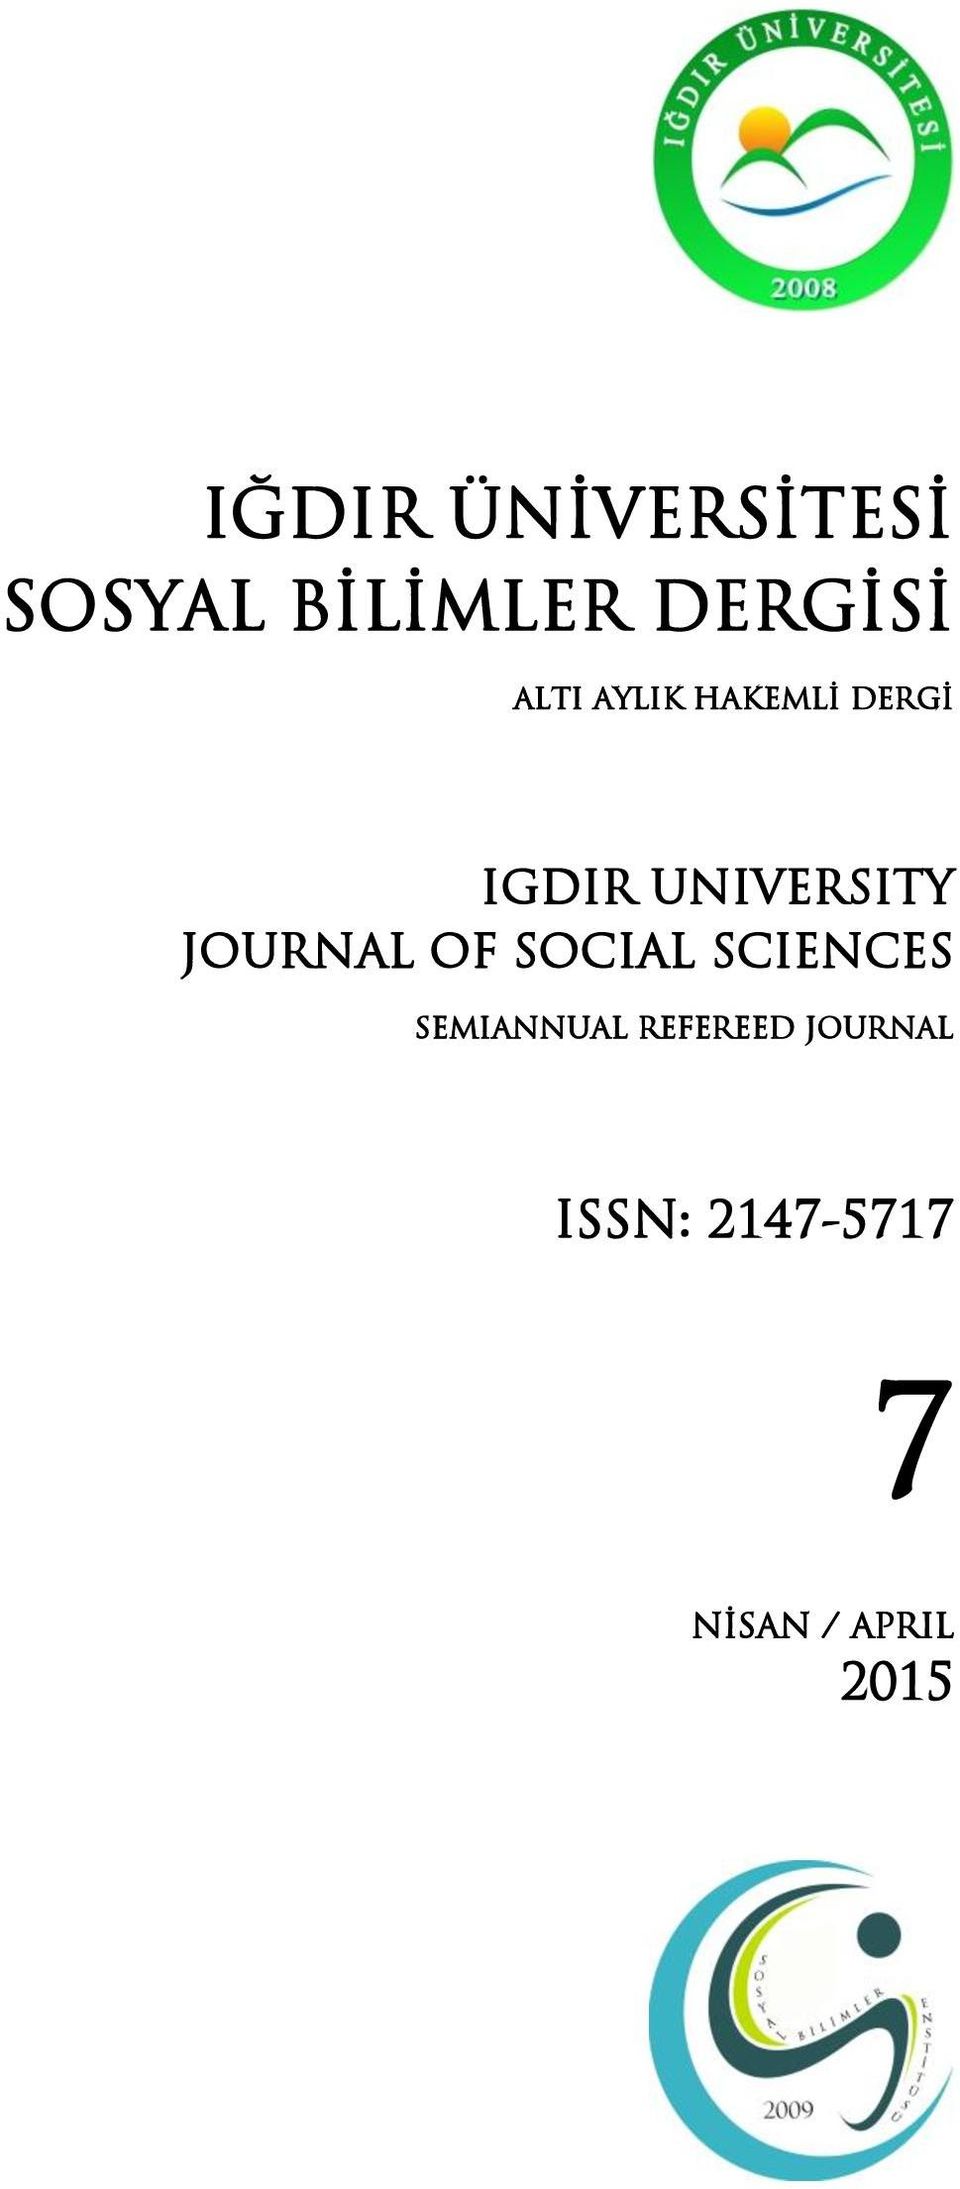 JOURNAL OF SOCIAL SCIENCES SEMIANNUAL